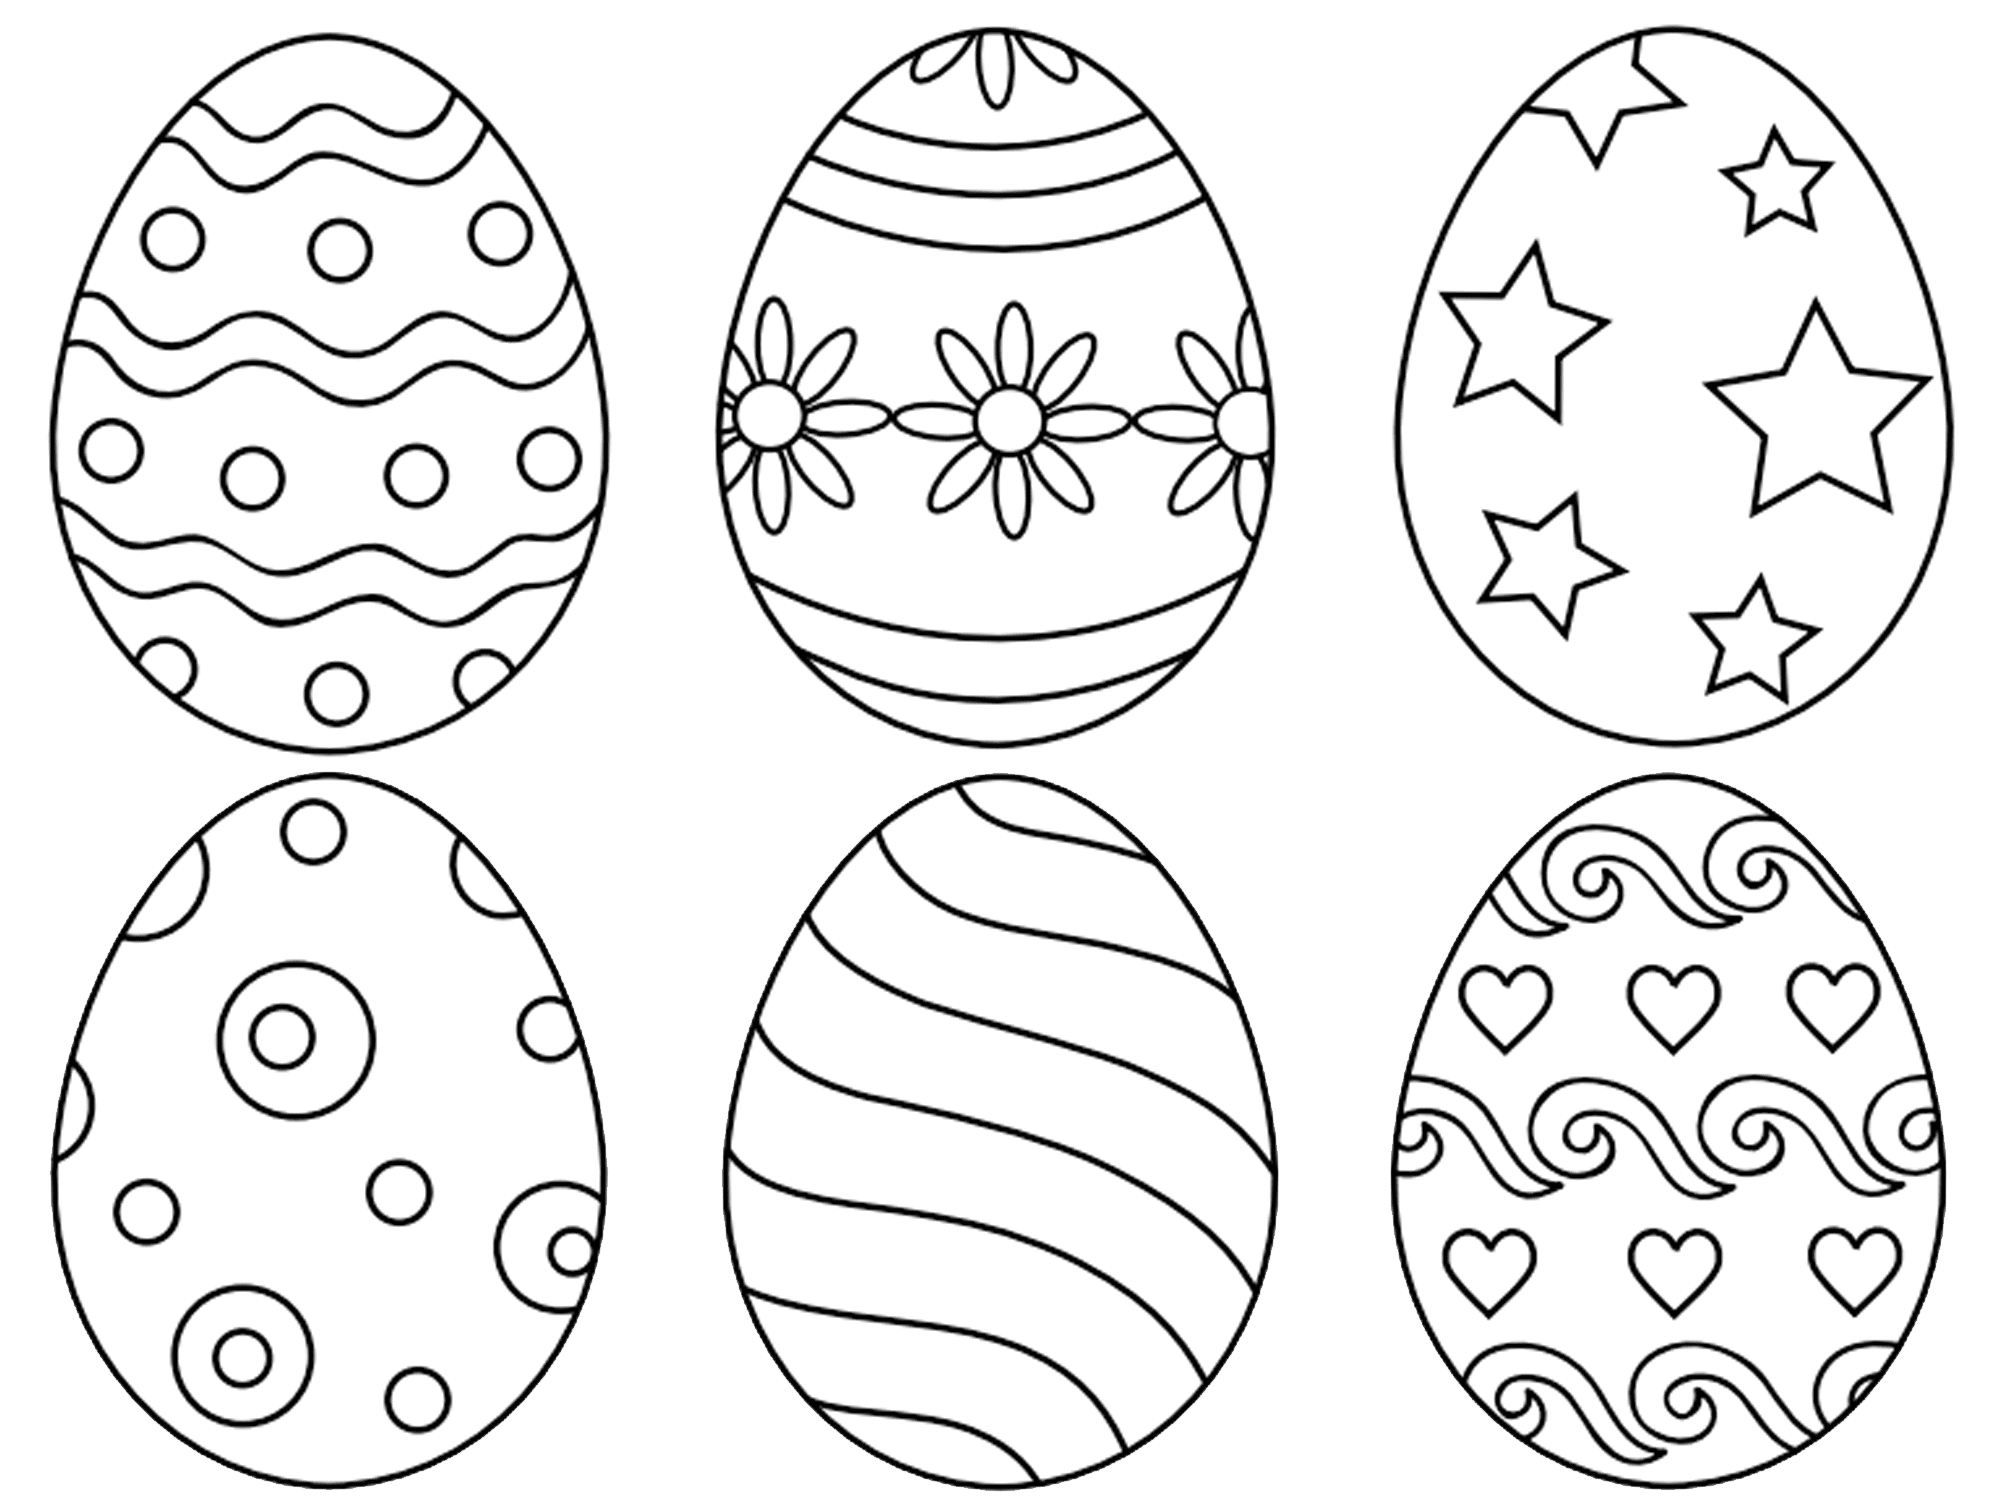 Download 9 Places For Free Printable Easter Egg Coloring Pages Coloring Home